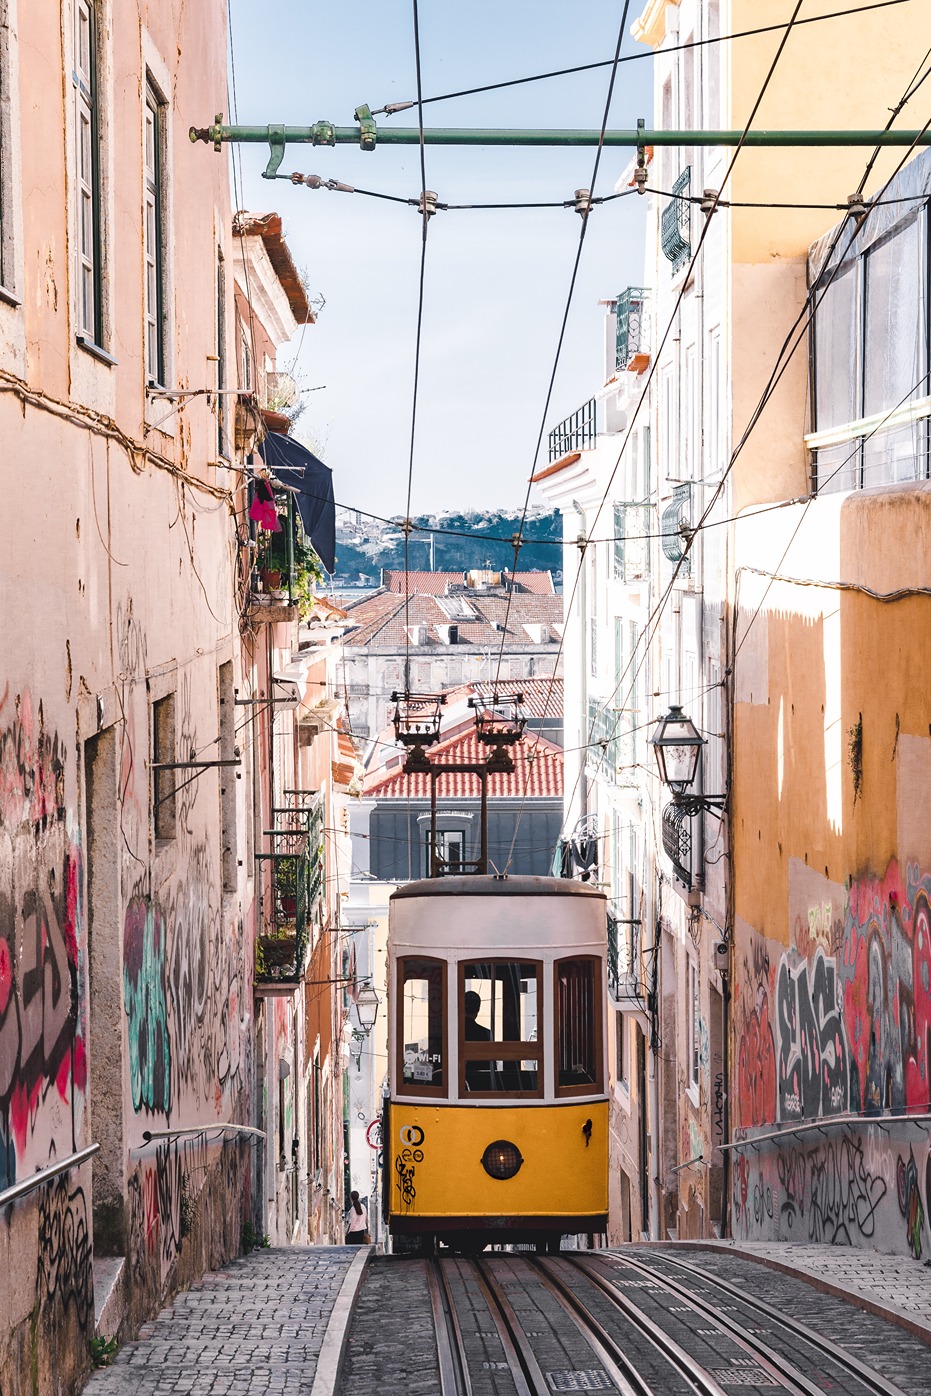 A photo of shot from behind a tram in Lisbon on a narrow city street